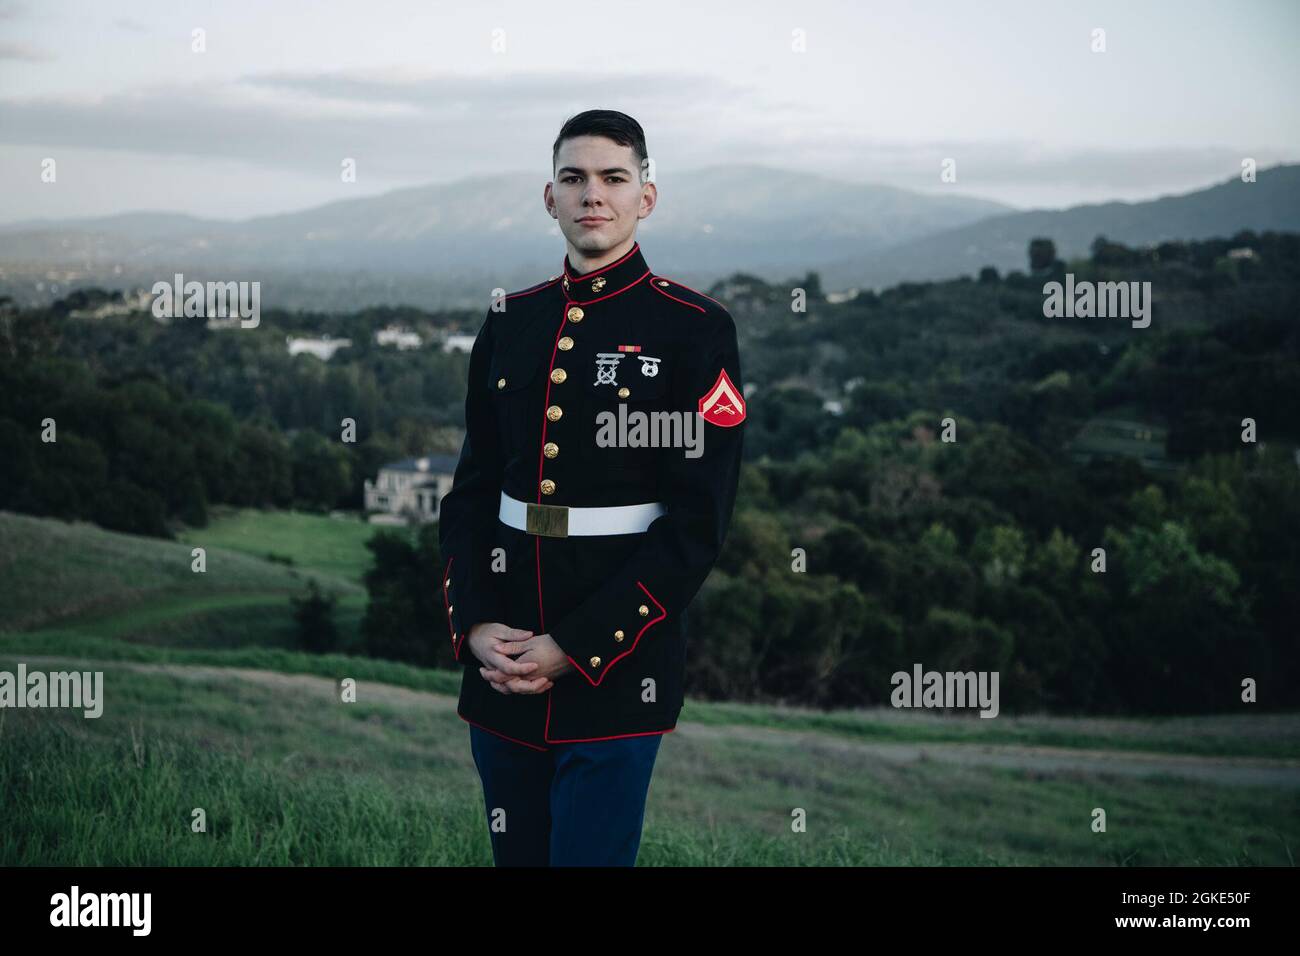 U.S. Marine Corps Lance Cpl. Jeremy Schutters, originally from Saratoga, California, a small arms repair technician, with Combat Logistics Battalion 453, Marine Corps Forces Reserve, poses for a photo in San Jose, California March 25, 2021. Schutters is currently attending De Anza College and studying administration of justice. As a reservist, Schutters has the opportunity to pursue his dream job as a Santa Clara county sheriff while also serving his country as a United States Marine. Stock Photo